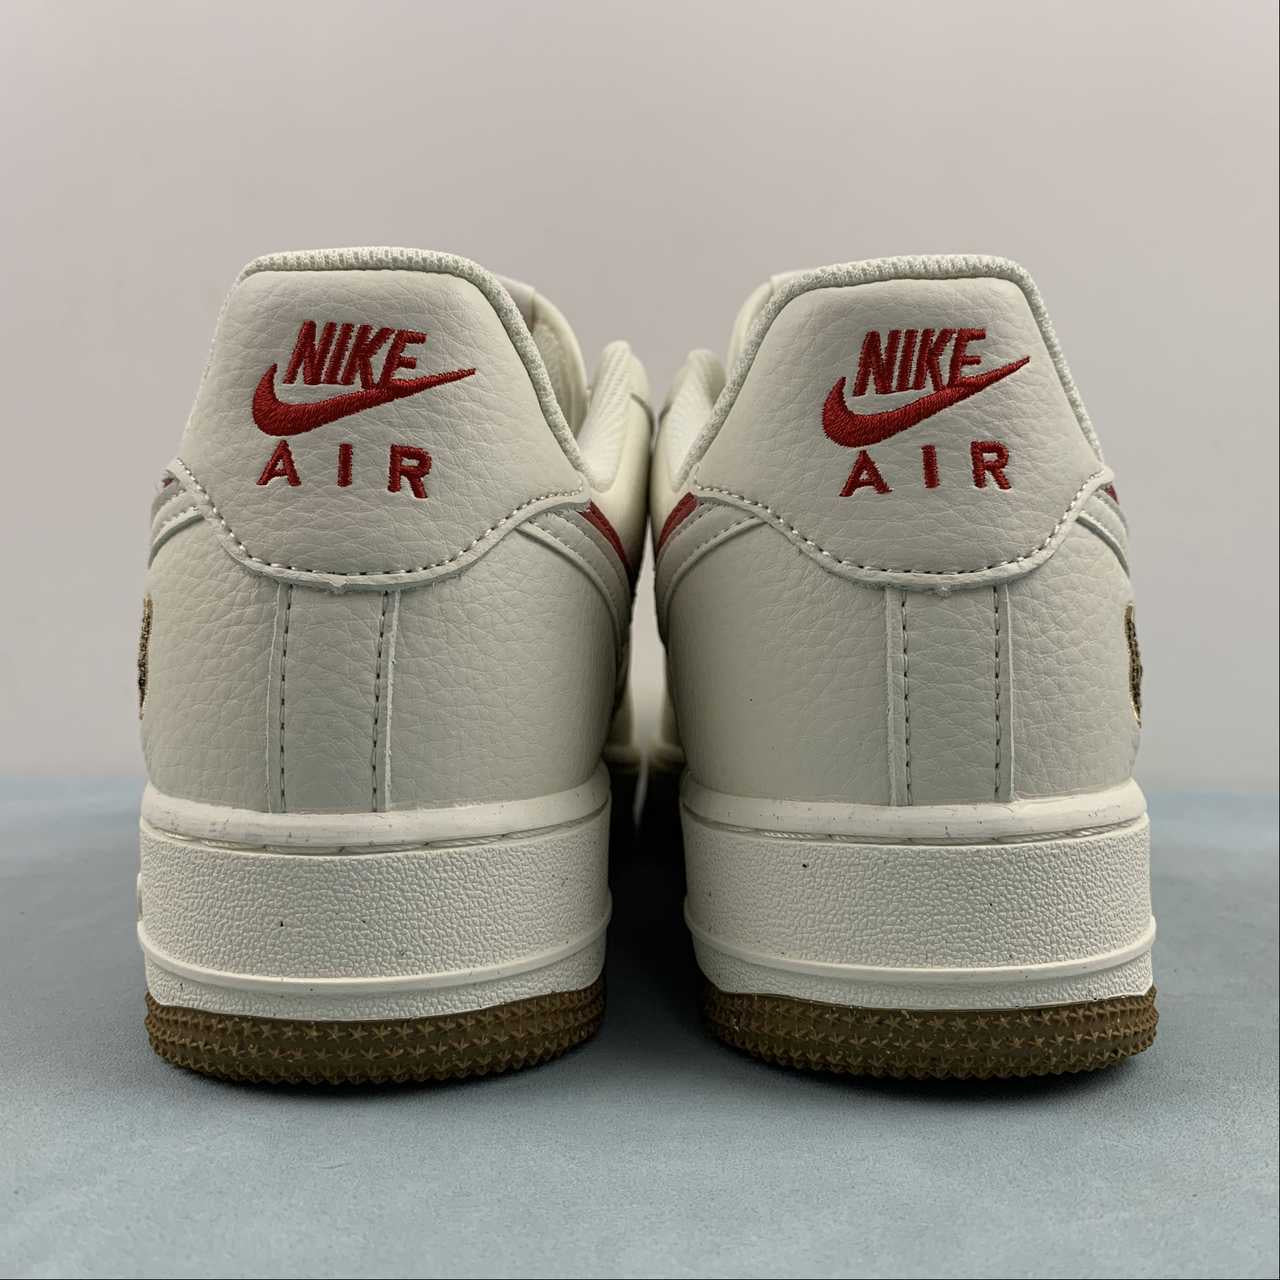 Nike airforce A1 grey red shoes